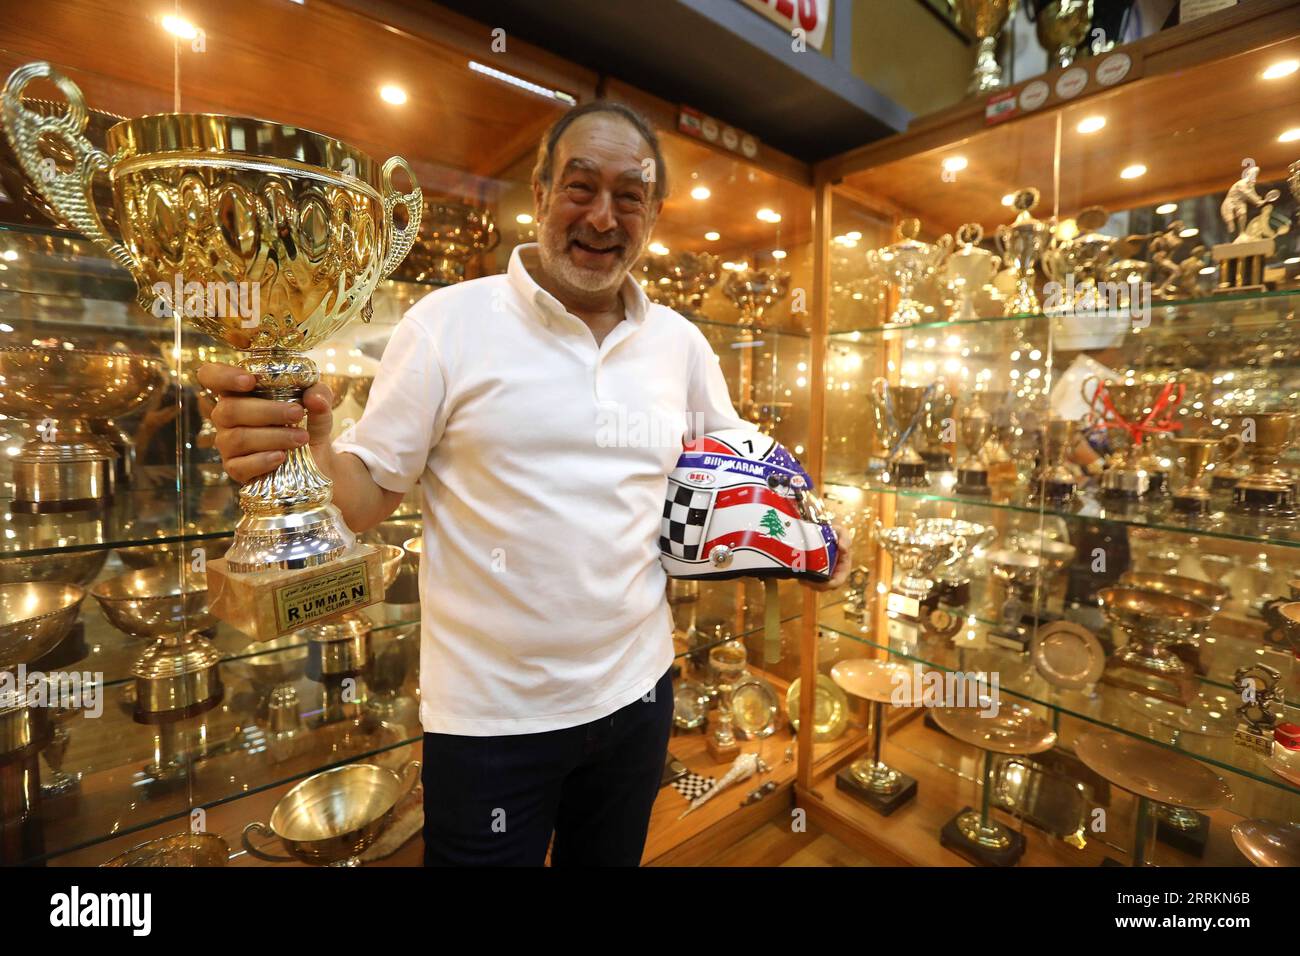 220915 -- BEIRUT, Sept. 15, 2022 -- Nabil Karam poses for photos with trophies he won in car races at the Billy Karam Museum in Zouk Mosbeh, Lebanon, Sept. 12, 2022. Lebanese race car champion Nabil Karam started his hobby of collecting mini sports cars 30 years ago. Today, the 65-year-old man has collected around 50,000 car miniatures from around the world. TO GO WITH Feature: Lebanese racer turns hobby into car museum  LEBANON-MUSEUM-MODEL CARS BilalxJawich PUBLICATIONxNOTxINxCHN Stock Photo